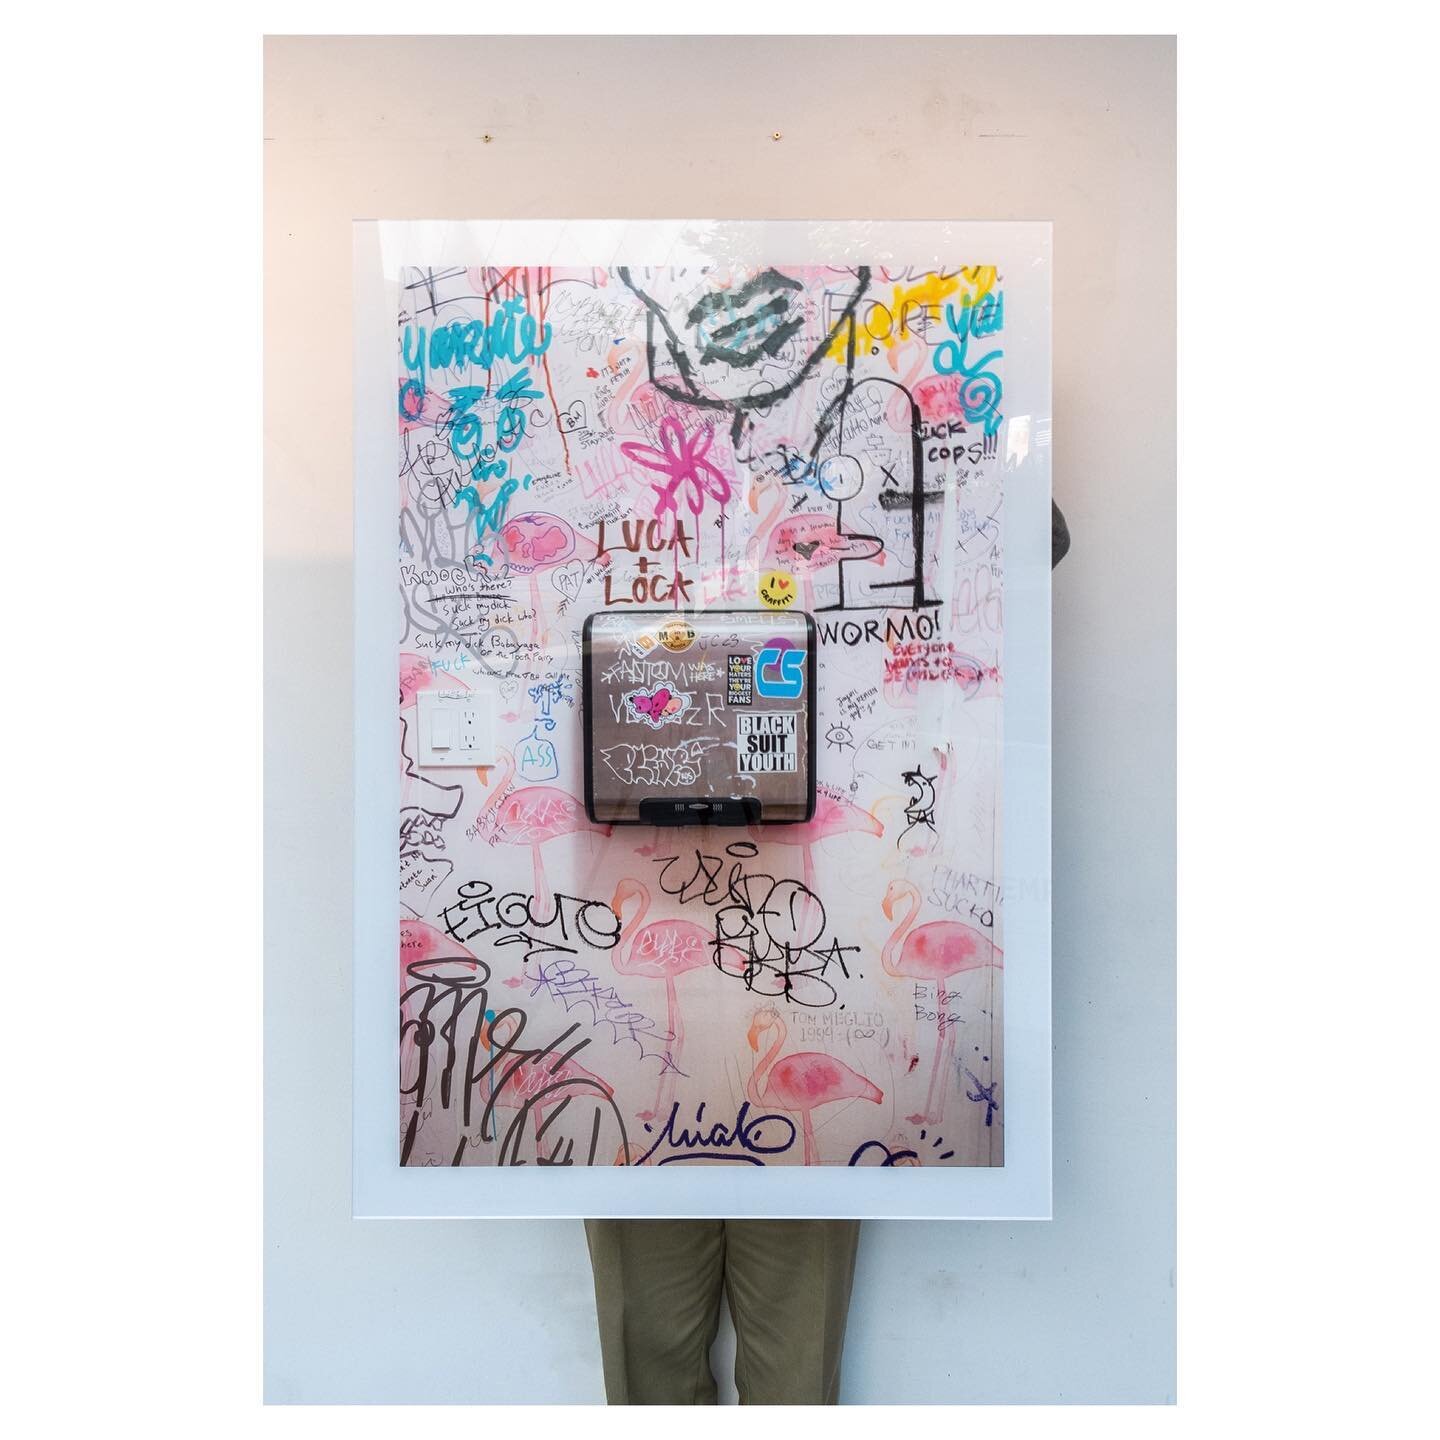 Bankside Hotel Residency 
-
As I begin my fourth week at @banksidehotel I thought I'd share some other work I have on show there. This is a recent addition to my 'Hand Dryer' series. Have a zoom in, there's plenty of entertaining scribbles on there t